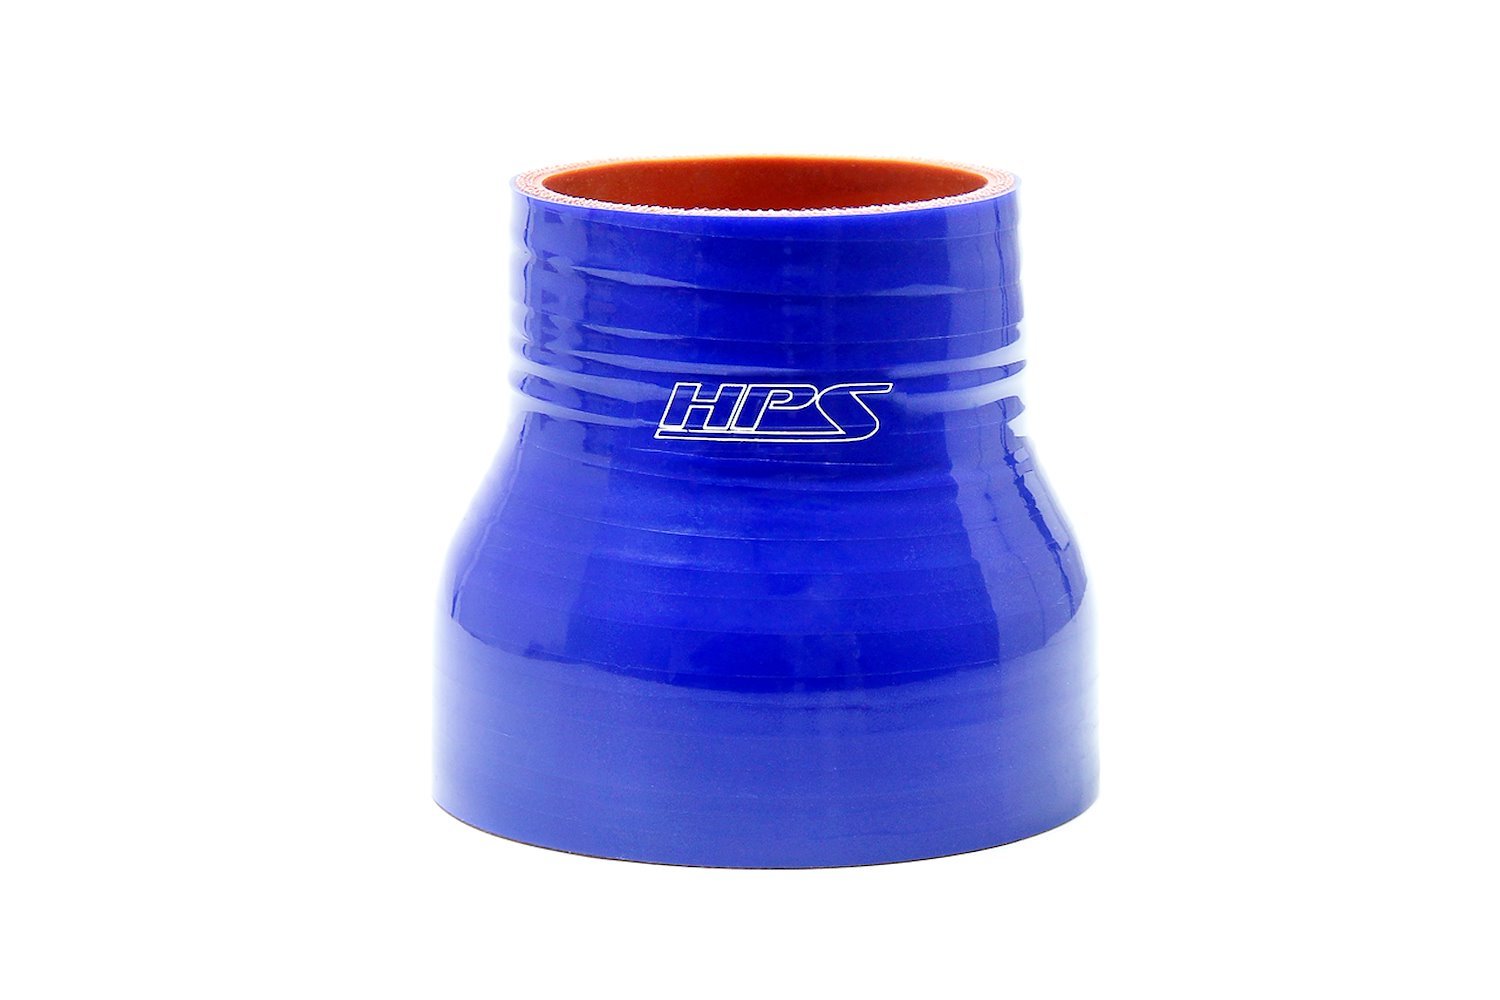 HTSR-238-300-L4-BLUE Silicone Reducer Hose, High-Temp 4-Ply Reinforced, 2-3/8 in. - 3 in. ID, 4 in. Long, Blue